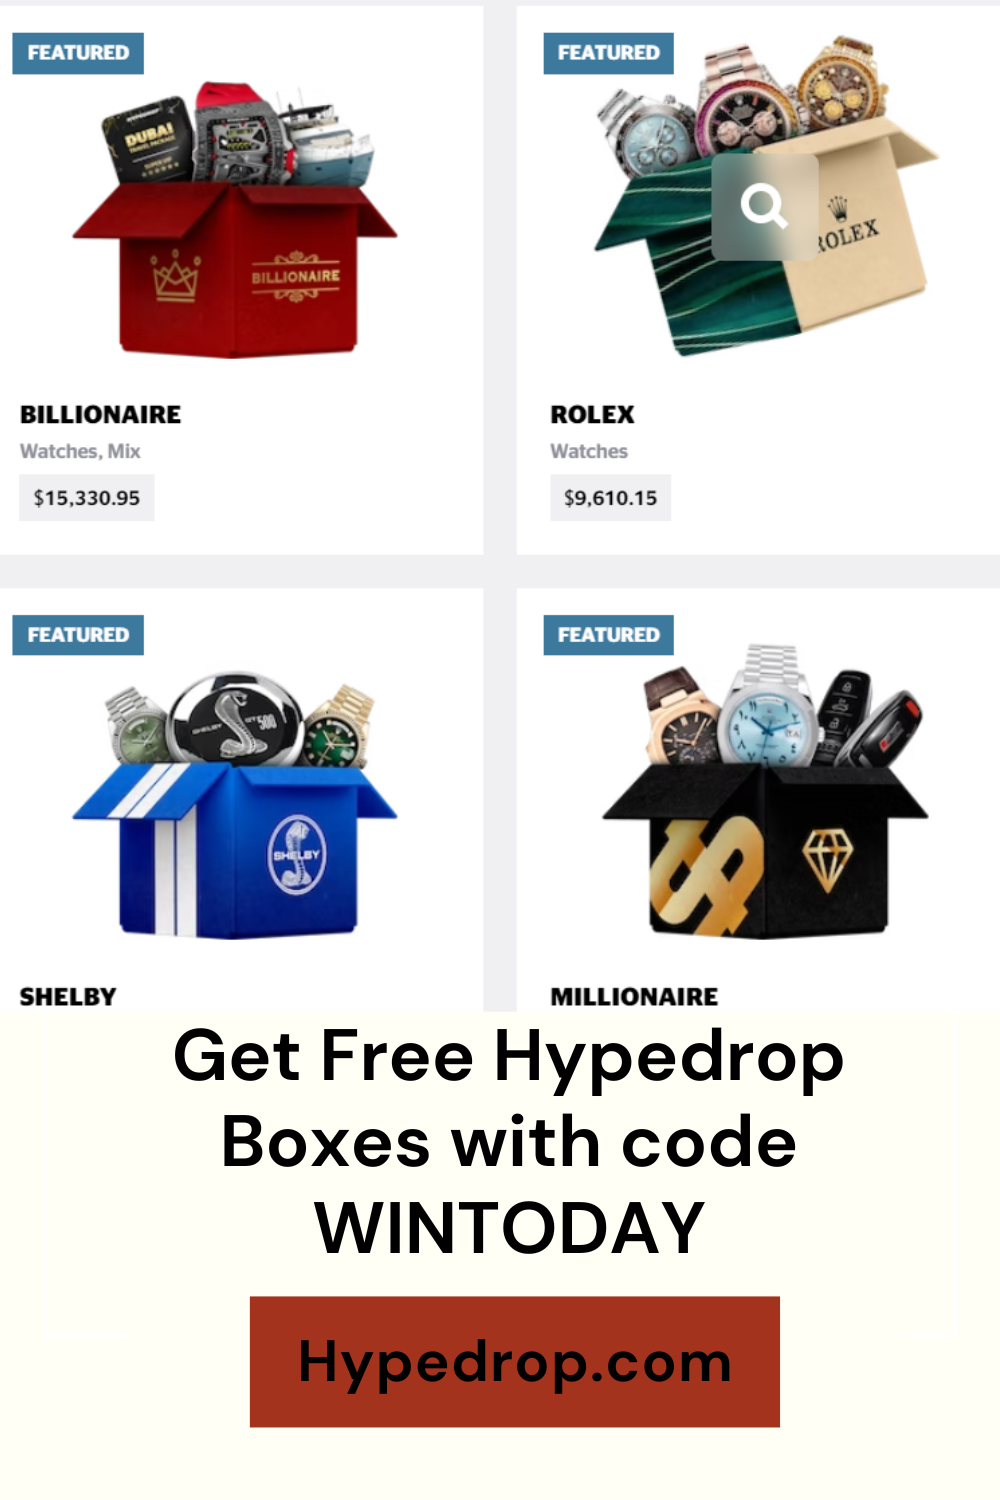 Hypedrp codes for free free Hypedrop box